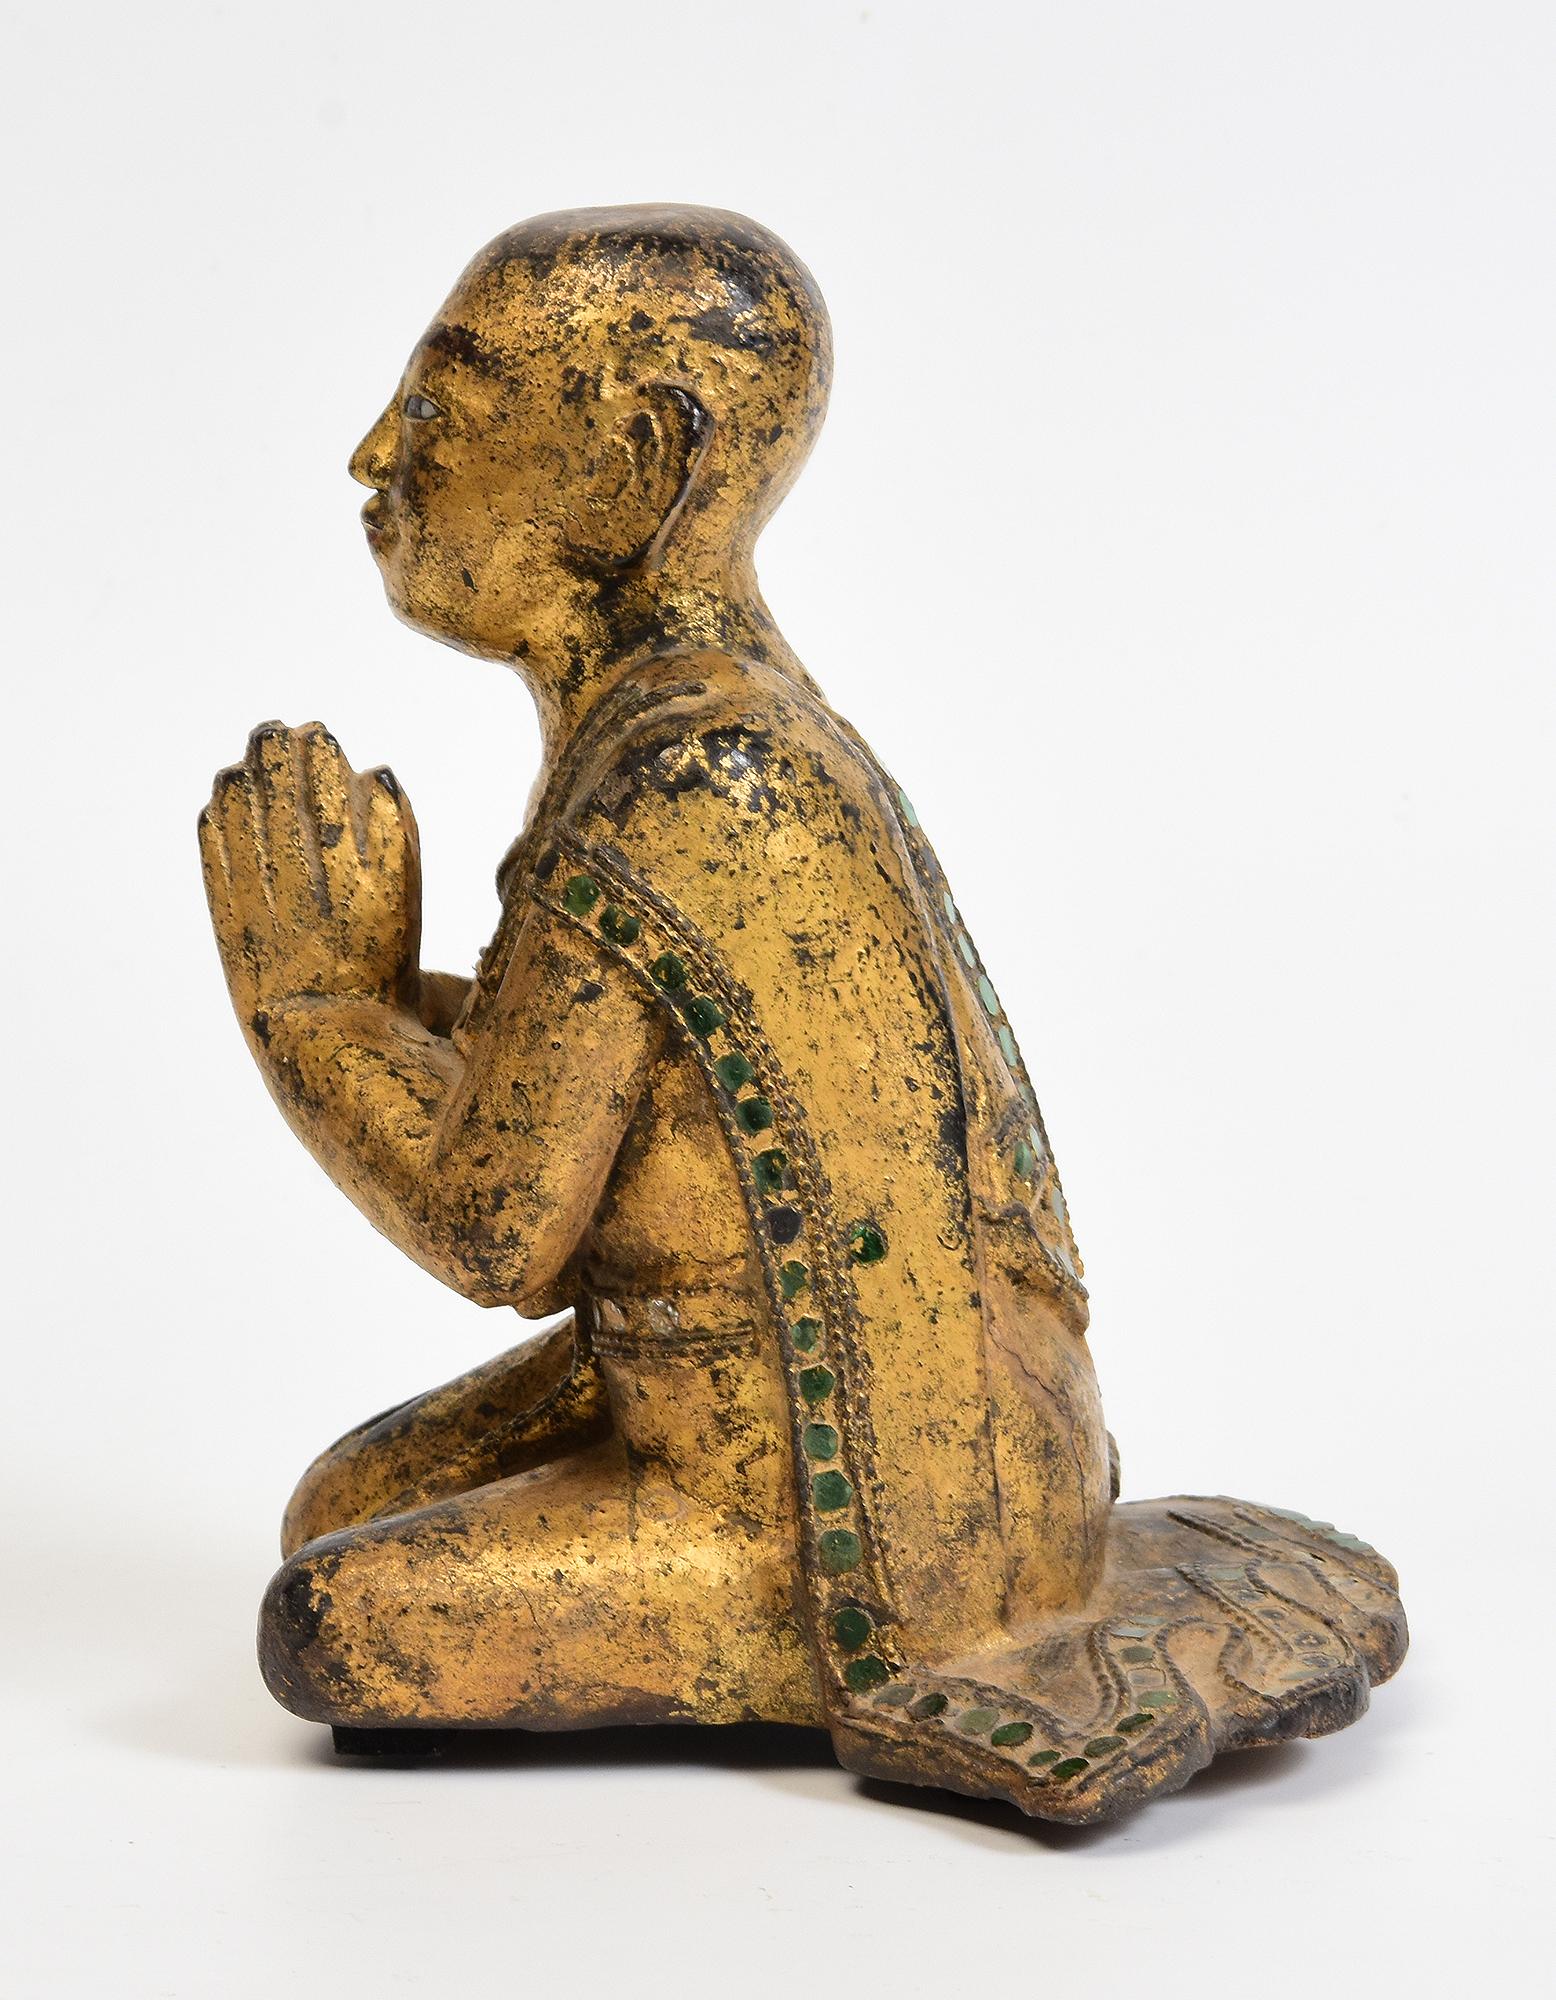 19th Century, Mandalay, Antique Burmese Wooden Seated Monk / Disciple For Sale 2